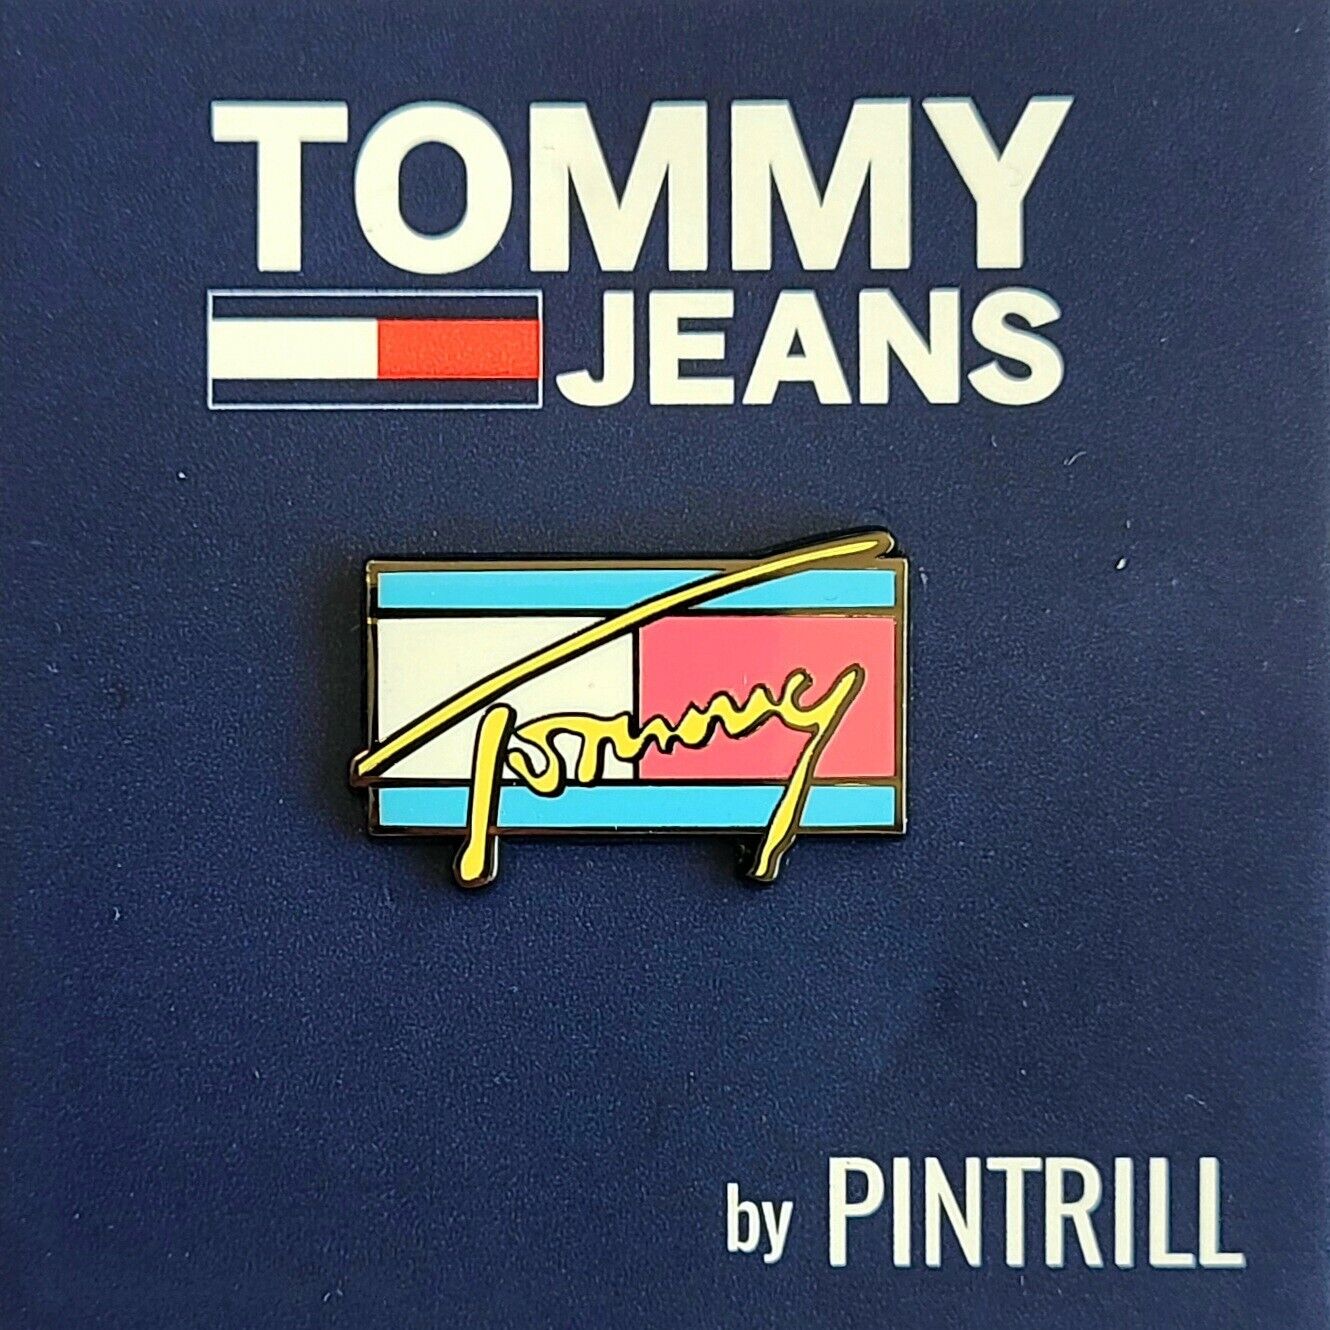 ⚡RARE⚡ PINTRILL x TOMMY HILFIGER Tommy Jeans Pin *BRAND NEW* LIMITED EDITION 👖